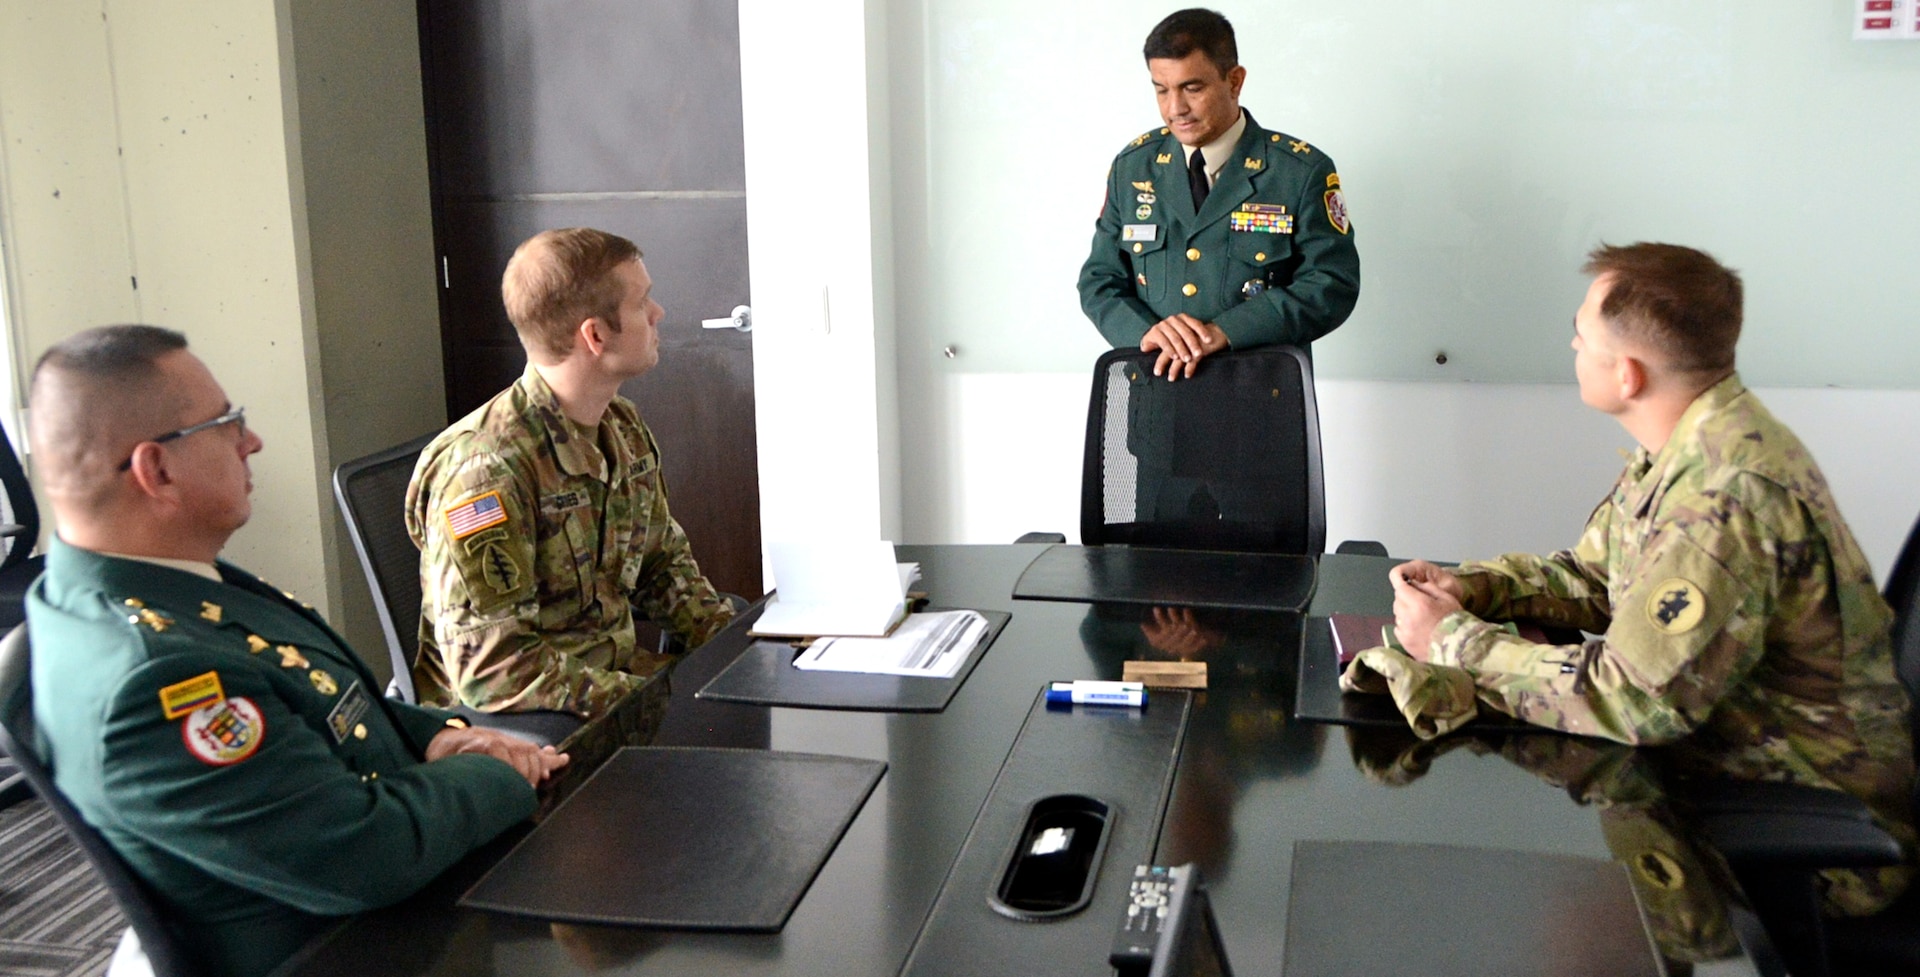 Representatives from U.S. Army South's Assistant Chief of Staff Engineer and U.S. Southern Command met with leadership from the Engineers branch of the Colombian Army.